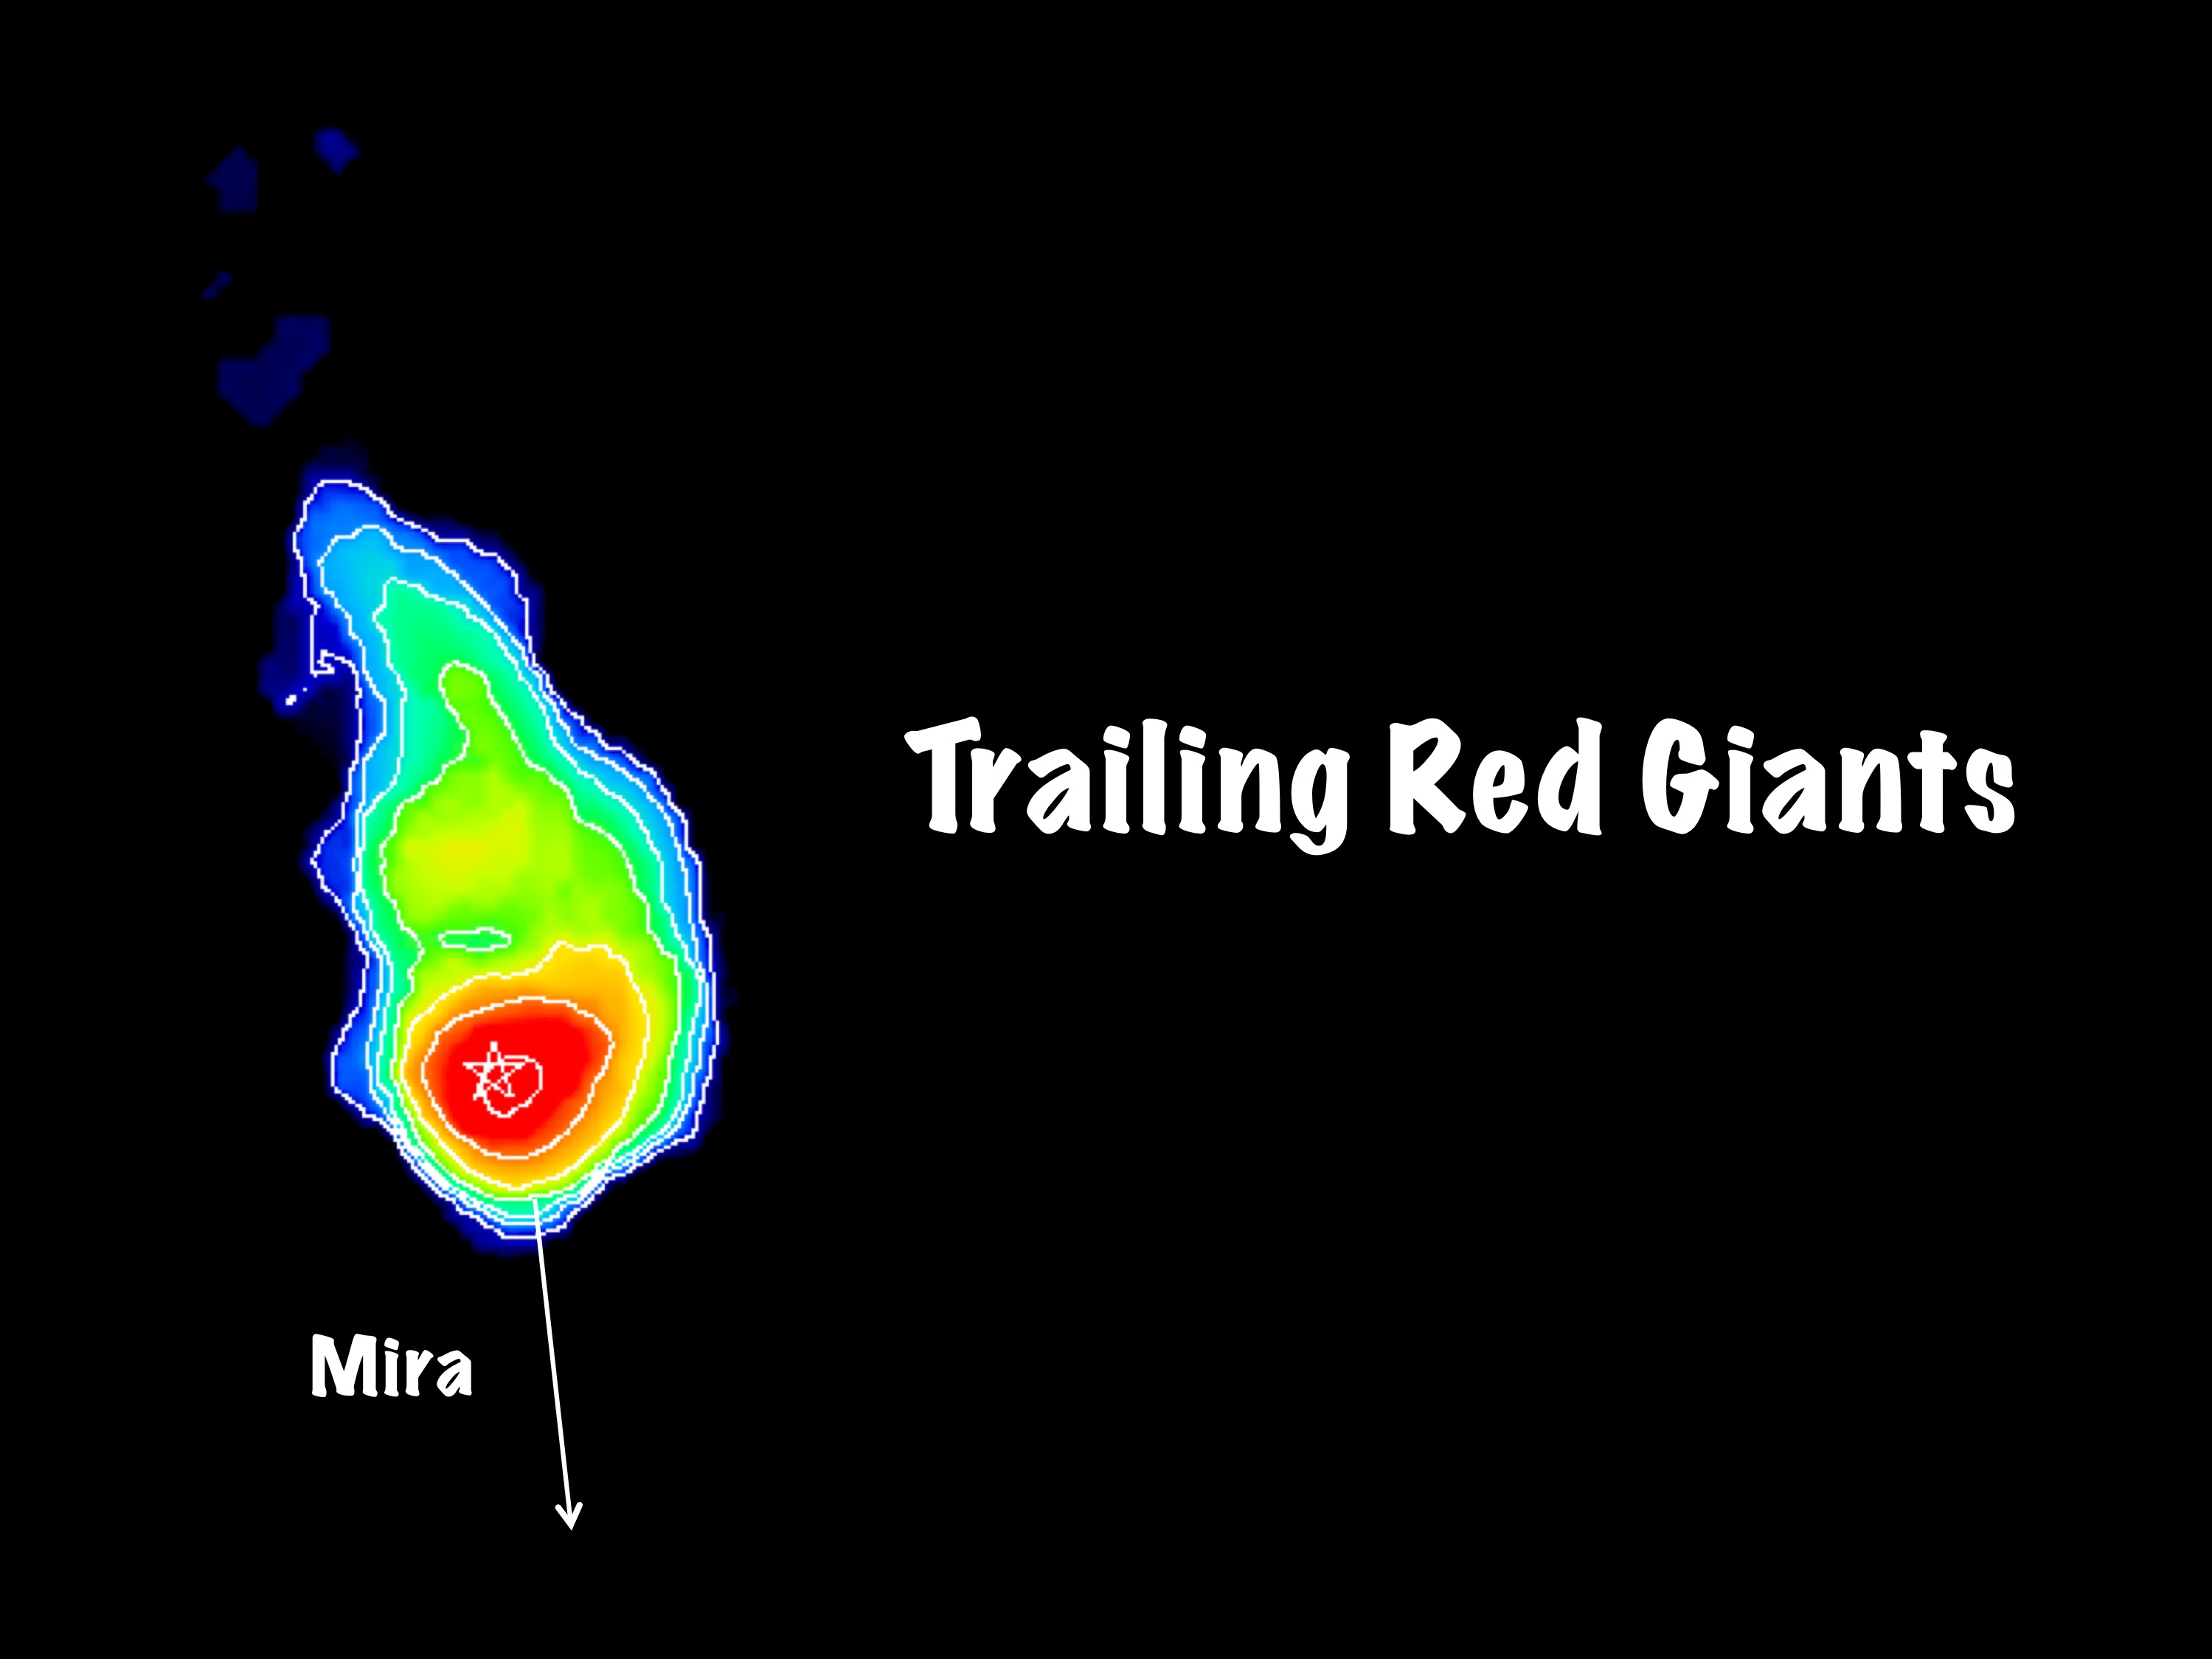 Podcast 1: Trailing Red Giants